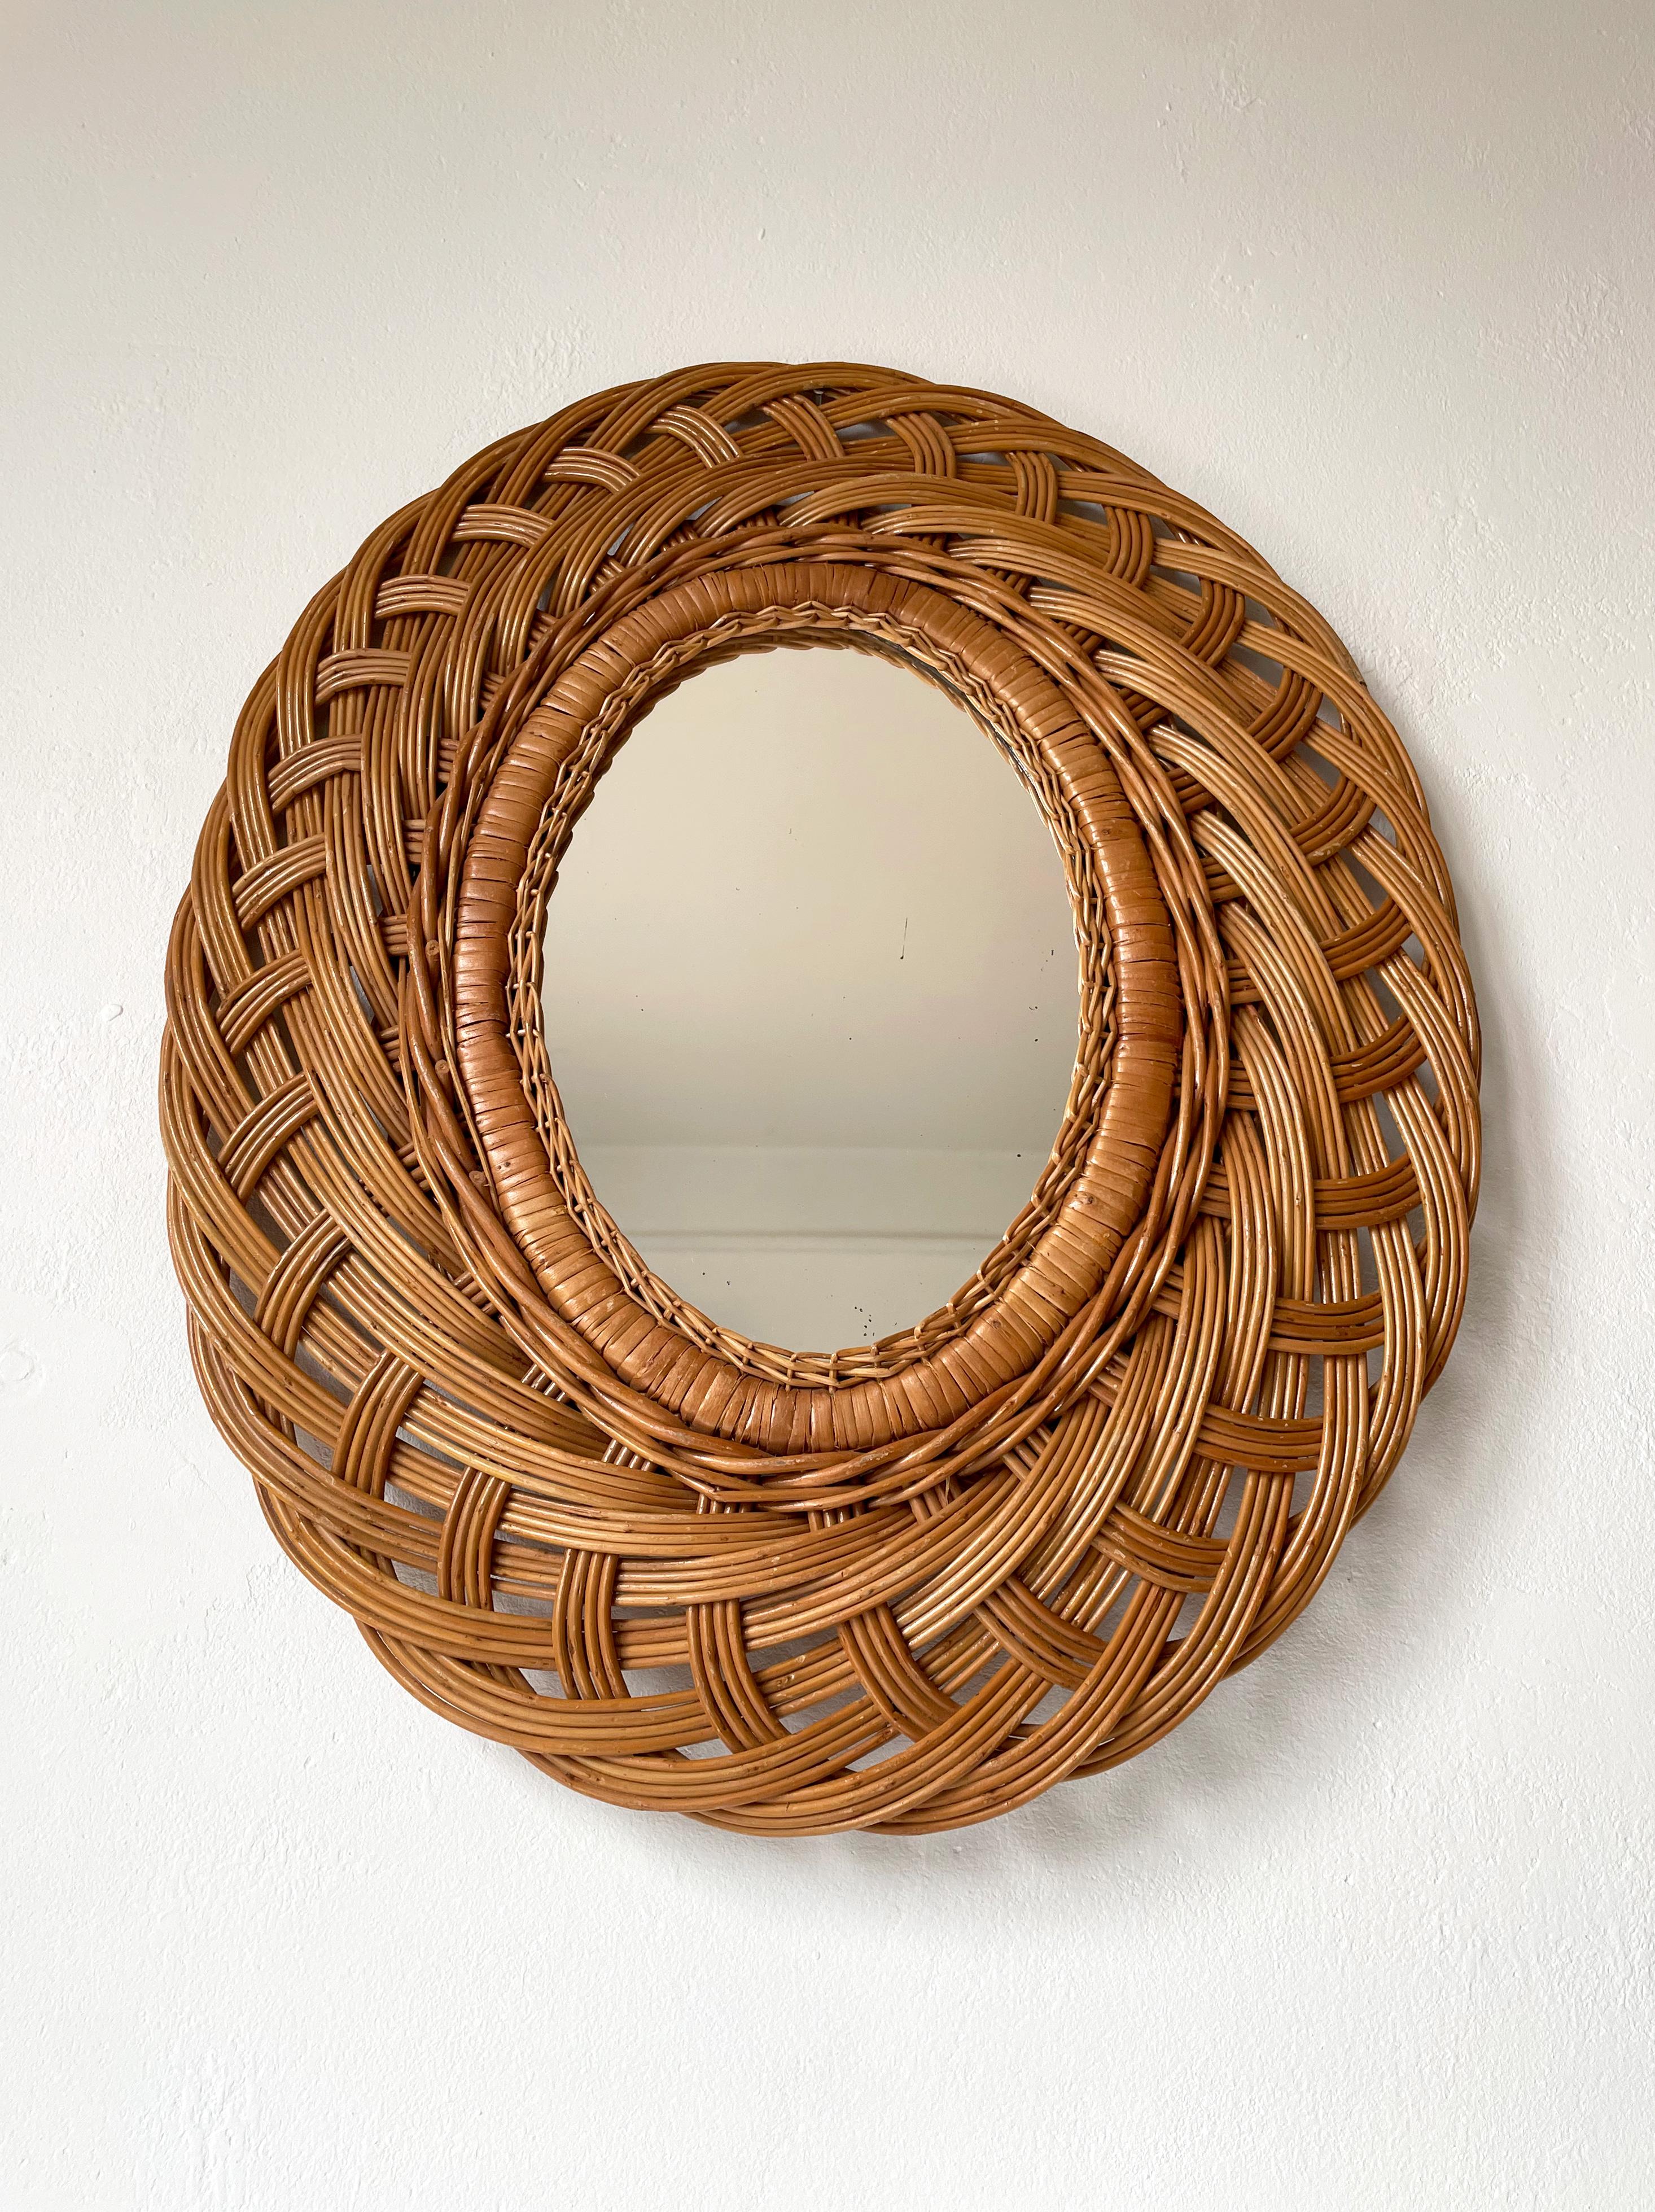 Hand-Crafted French 1950s Wicker Rattan Oval Wall Mirror For Sale